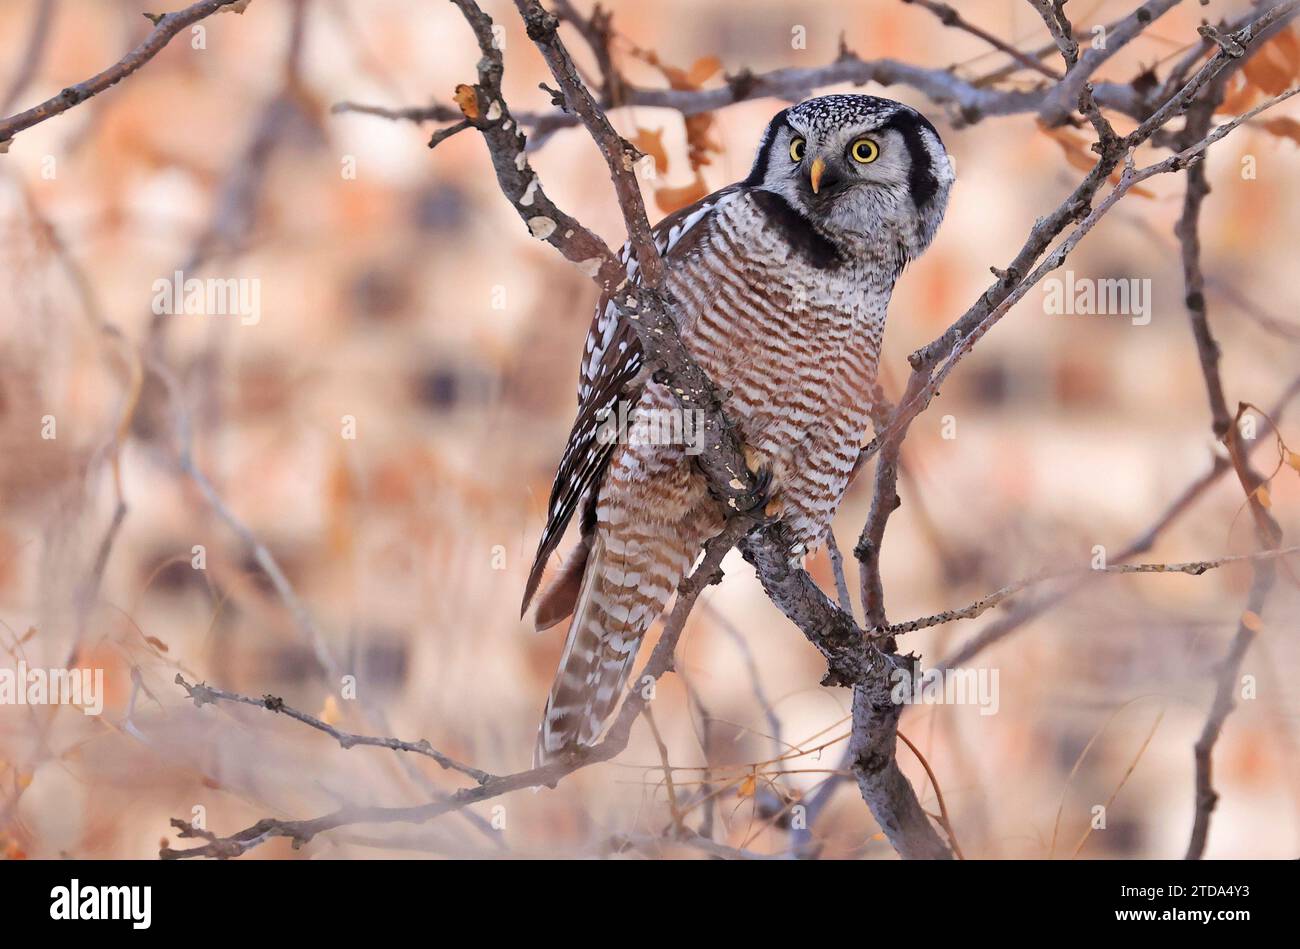 Northern Hawk Owl sitting on a branch tree into the forest, Quebec, Canada Stock Photo